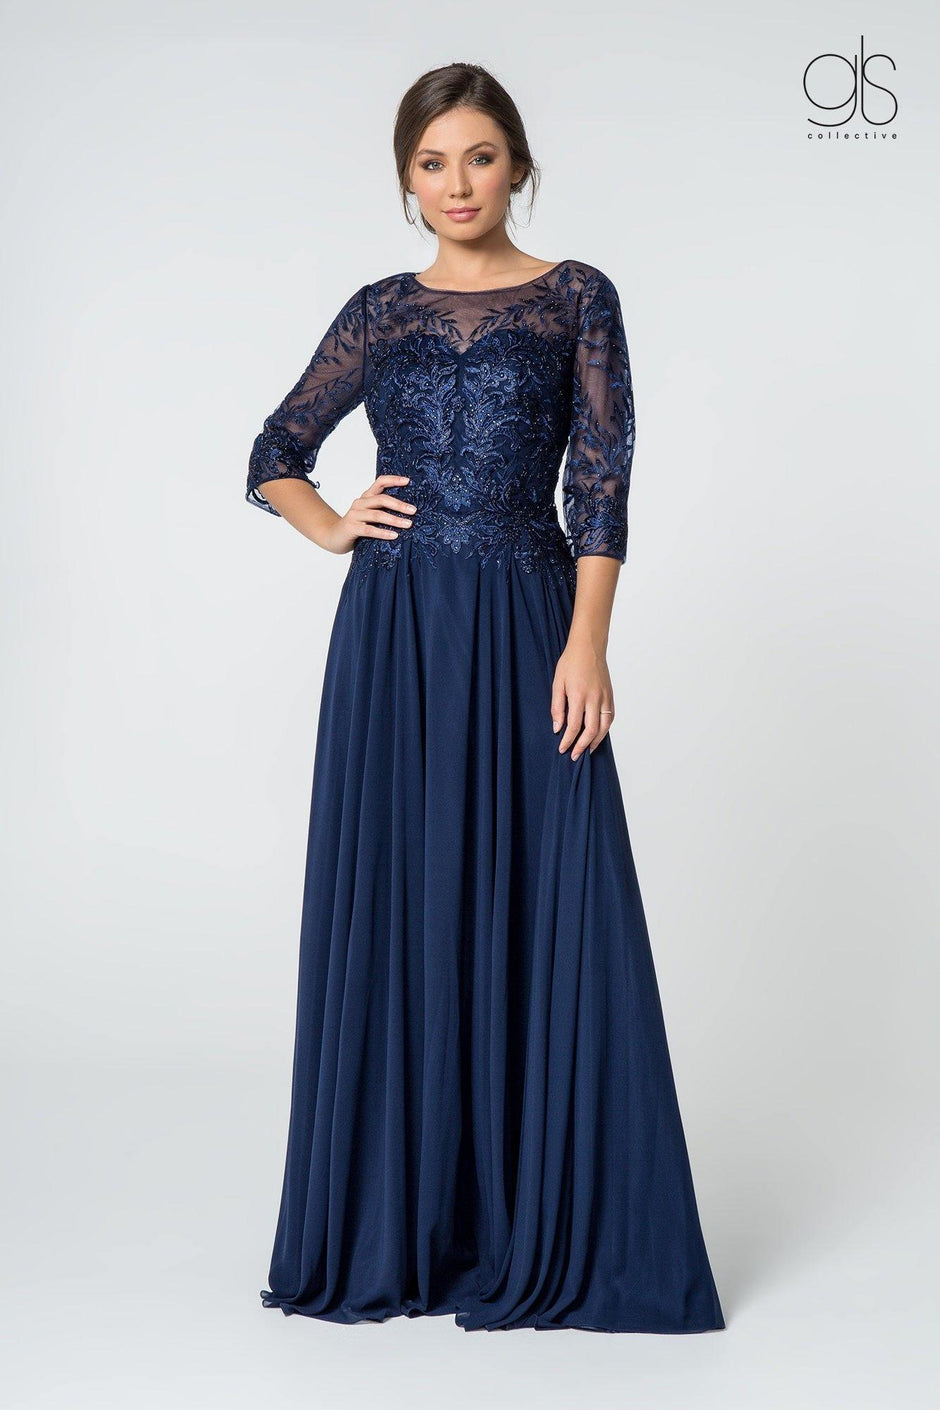 Cinderella Divine CD233 Long Sleeve Formal Dress Evening Gown – The ...